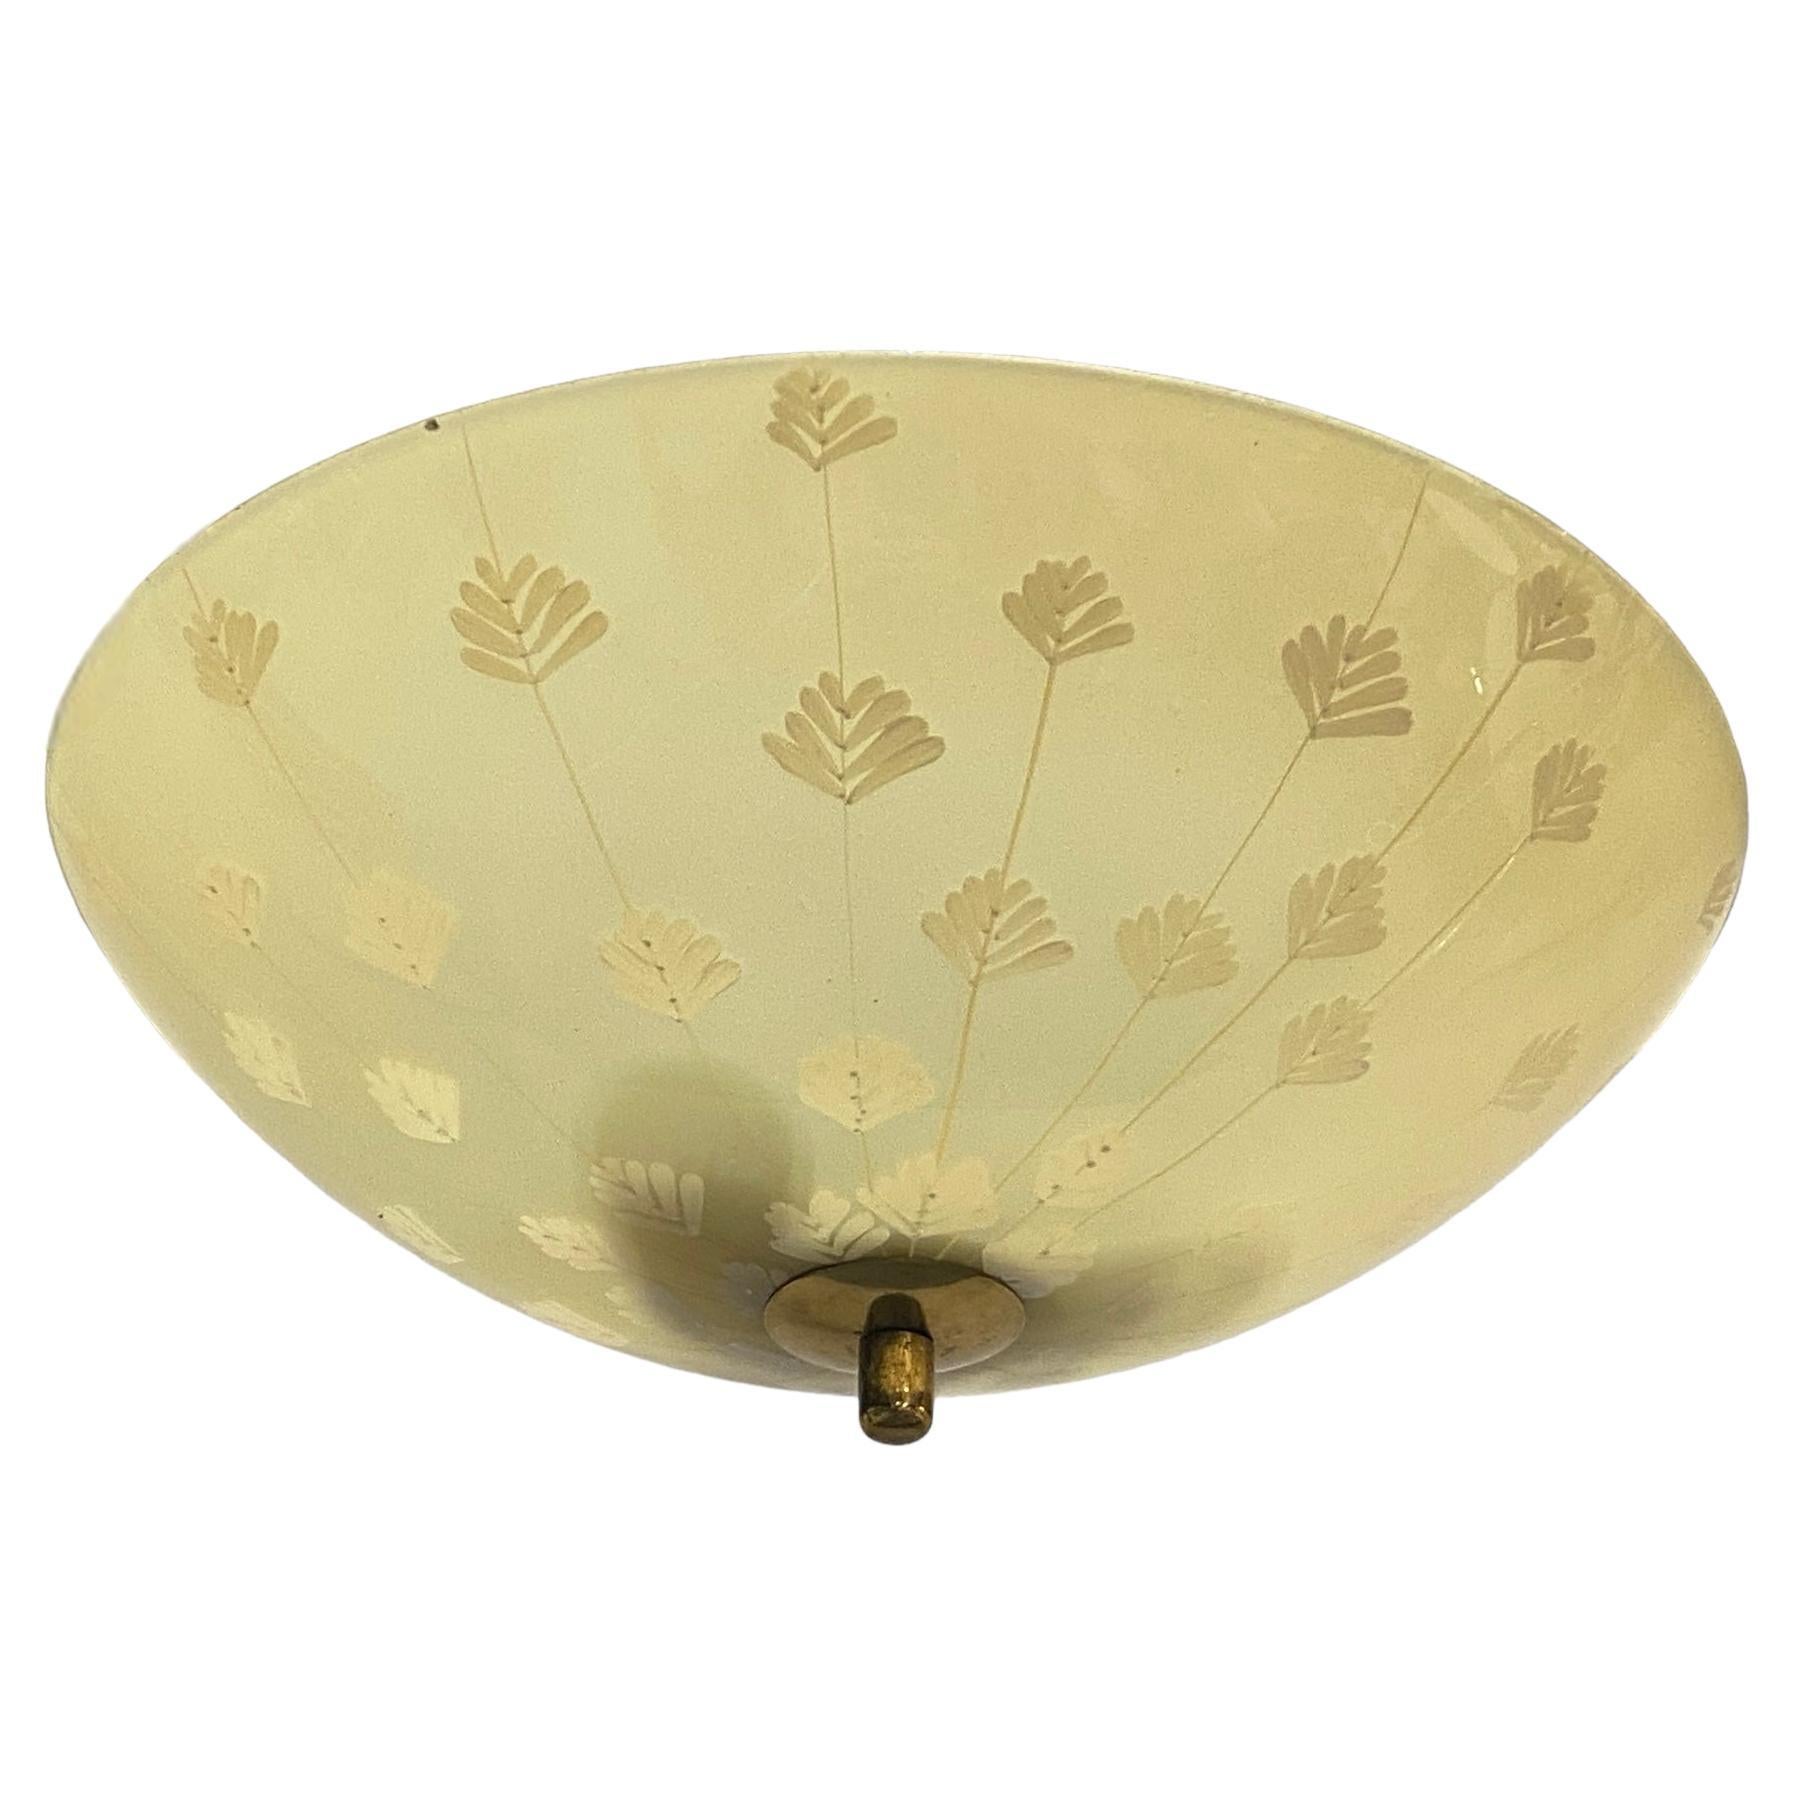 A beautiful ceiling pendant with hand painted on flower decorations, designed by Lisa Johansson-Pape and manufactured by Orno Oy in Finland in the 1950s. The lamp is in it's full original condition down to the wirings. The glass shade is also